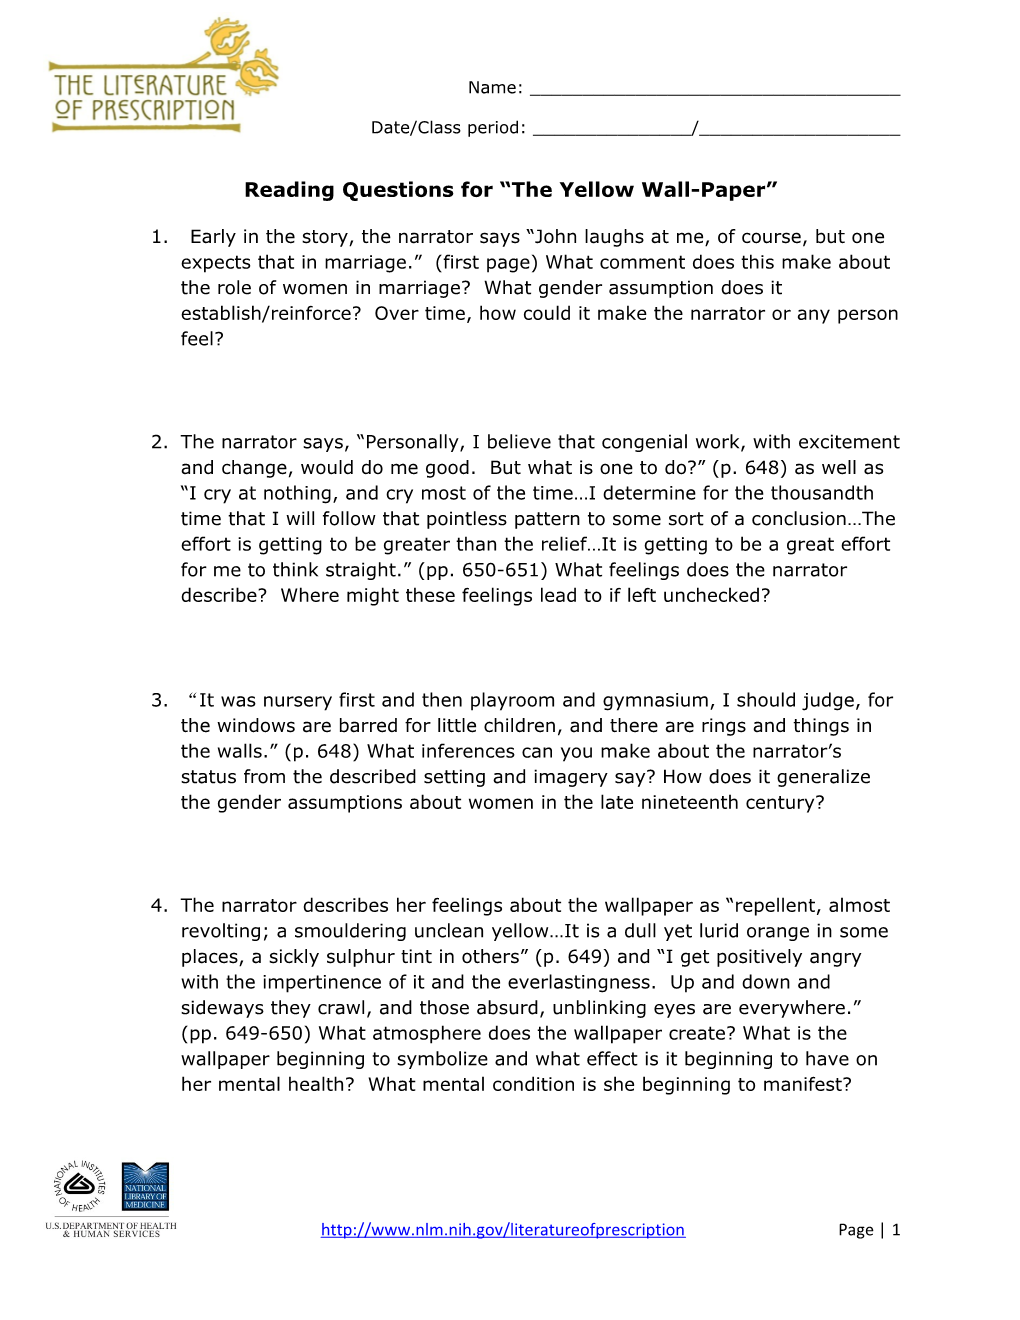 Reading Questions For "The Yellow Wall-Paper"